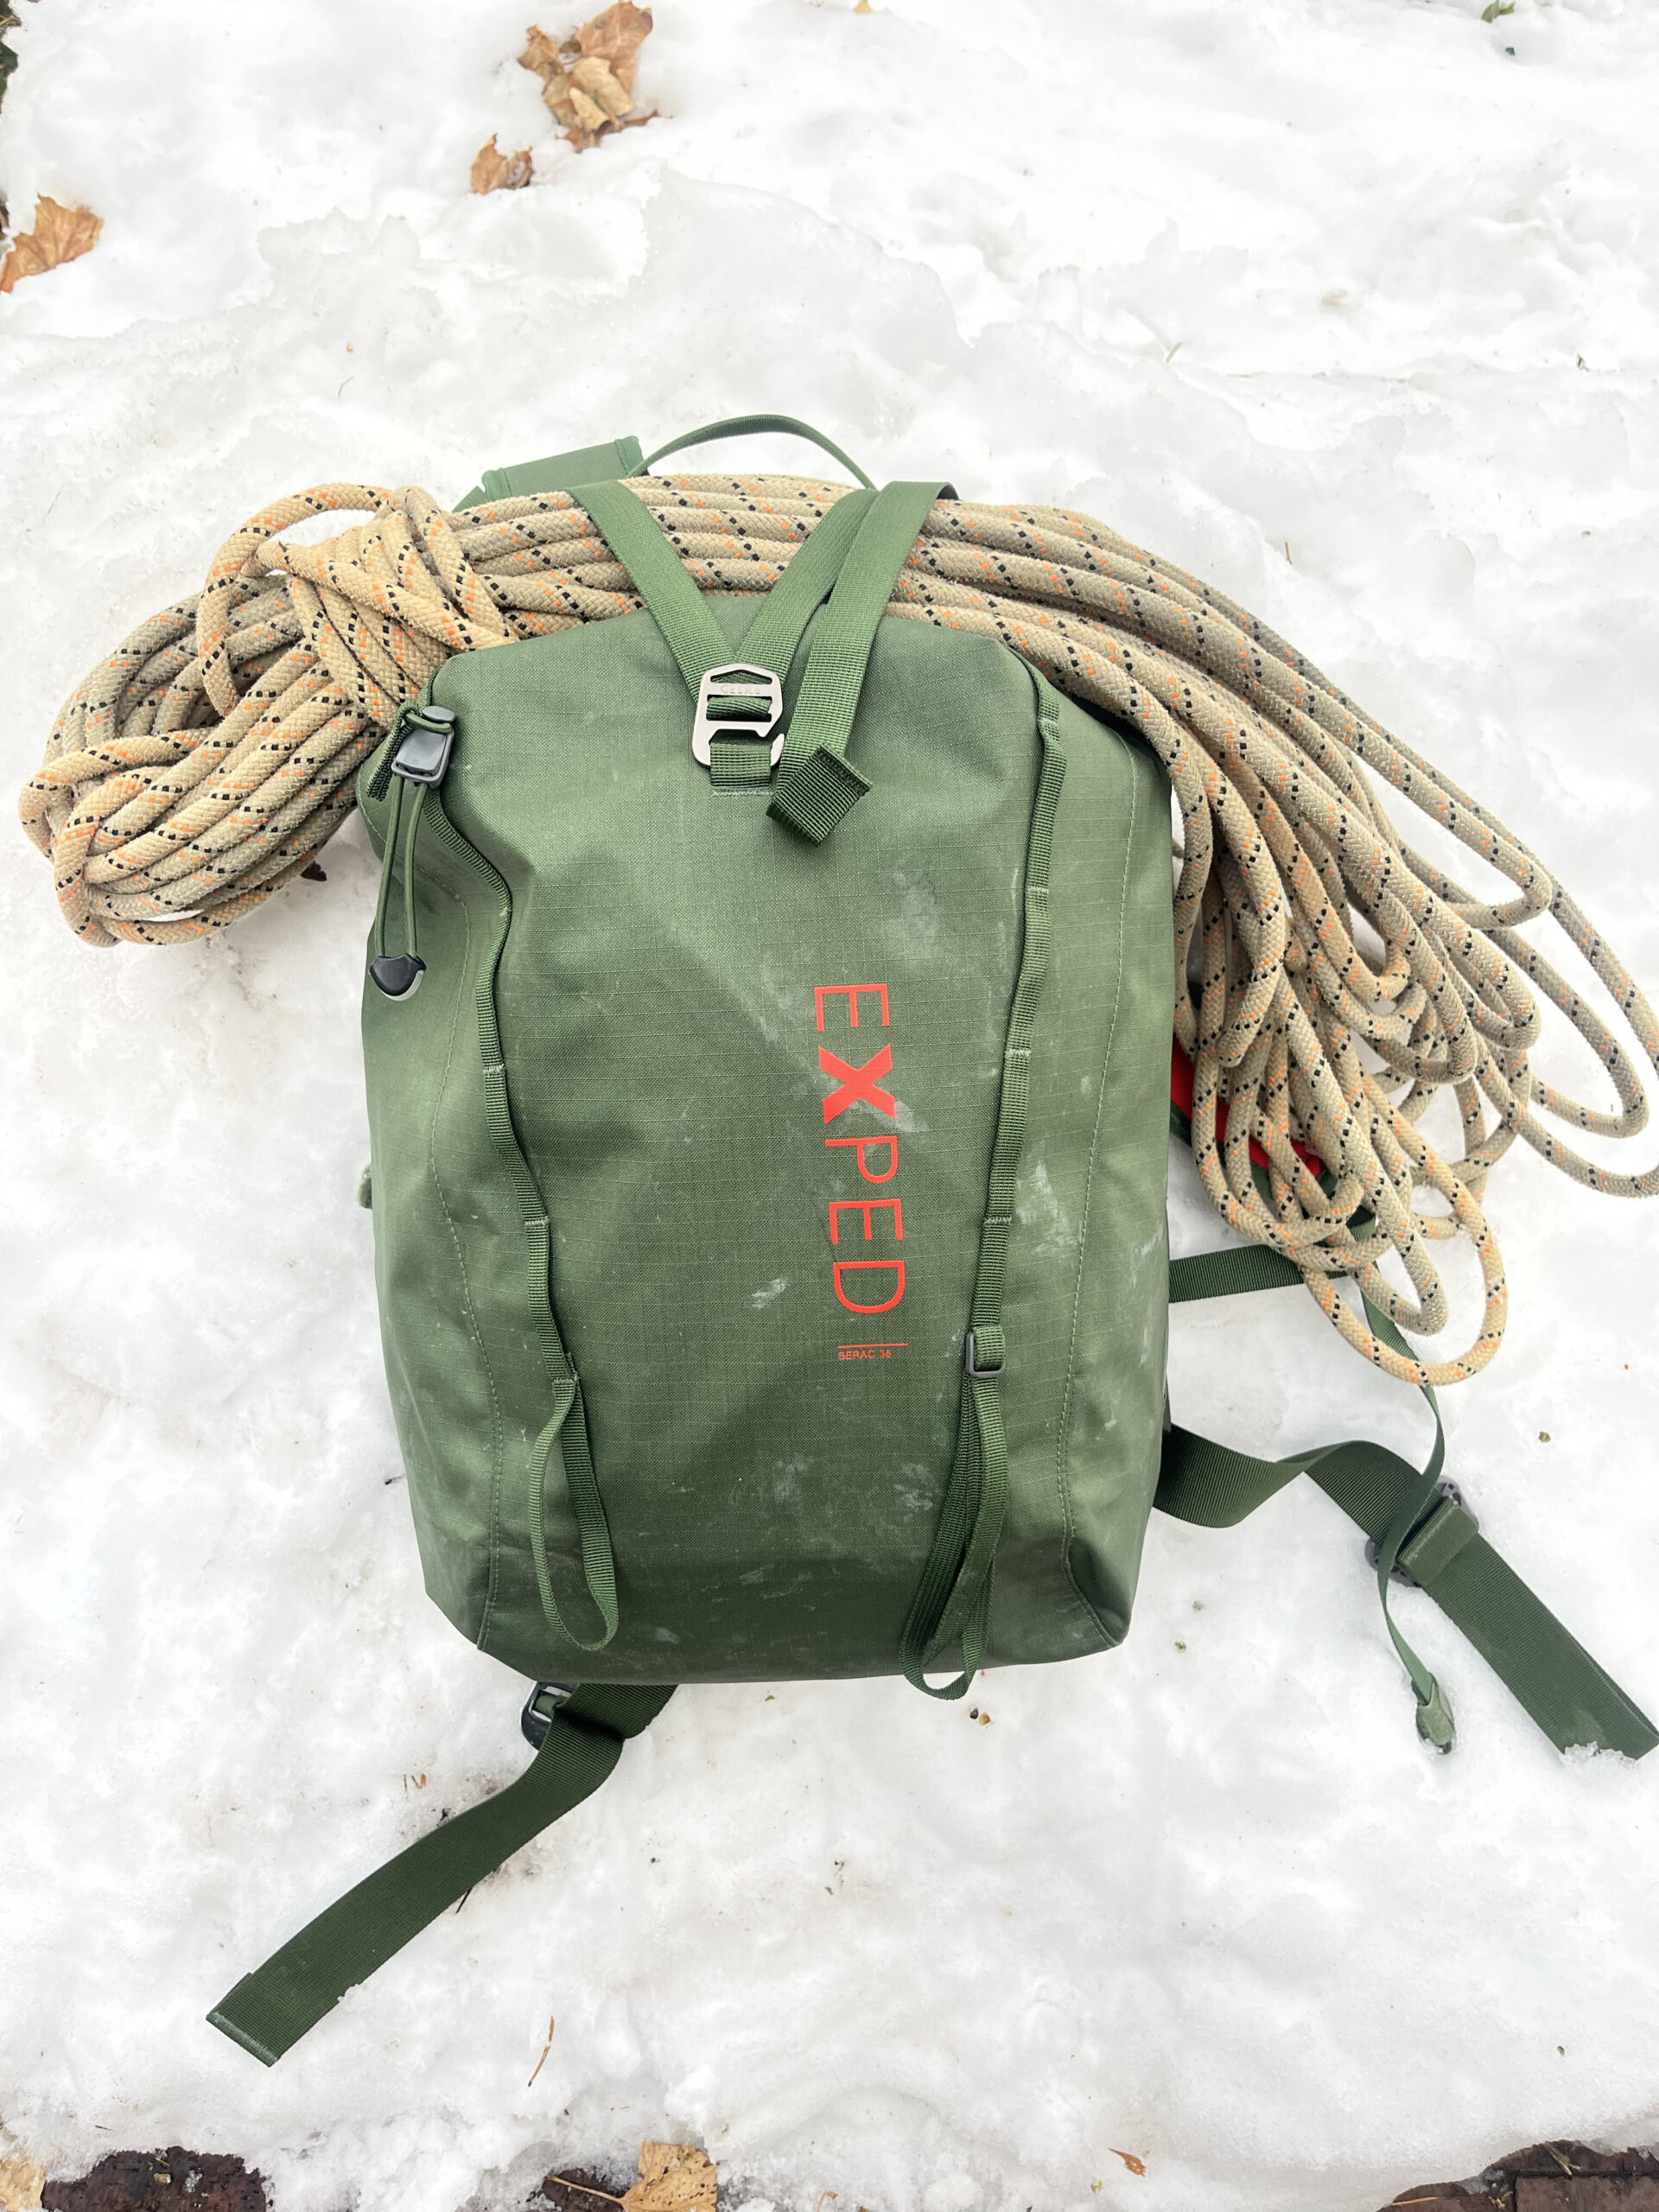 The ExPed Serac can easily carry a rope.